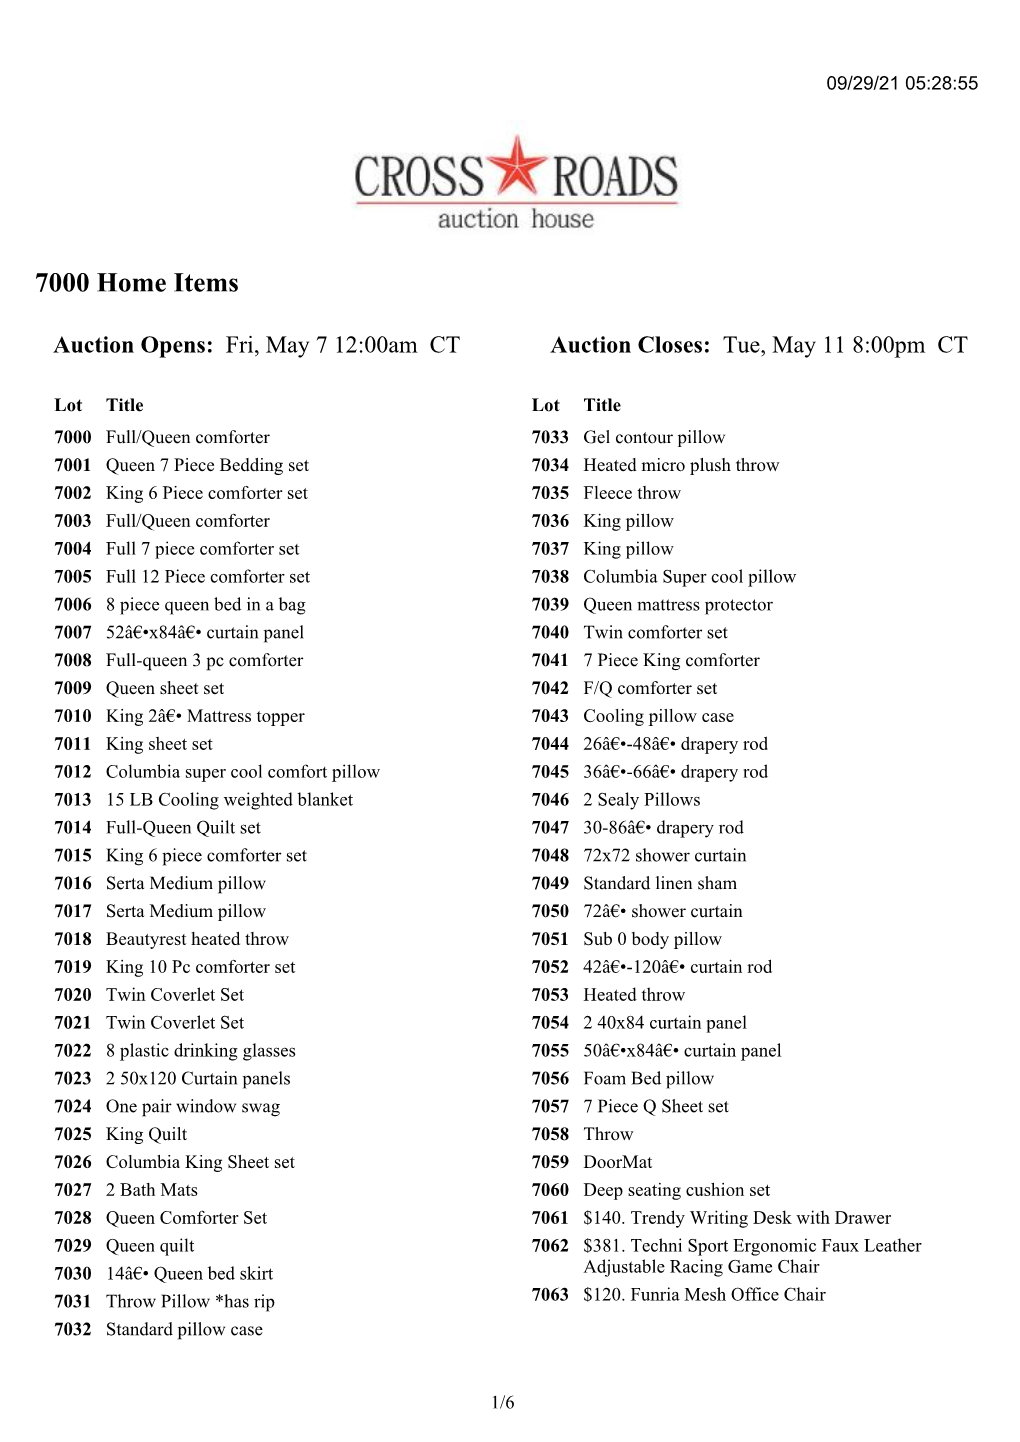 7000 Home Items